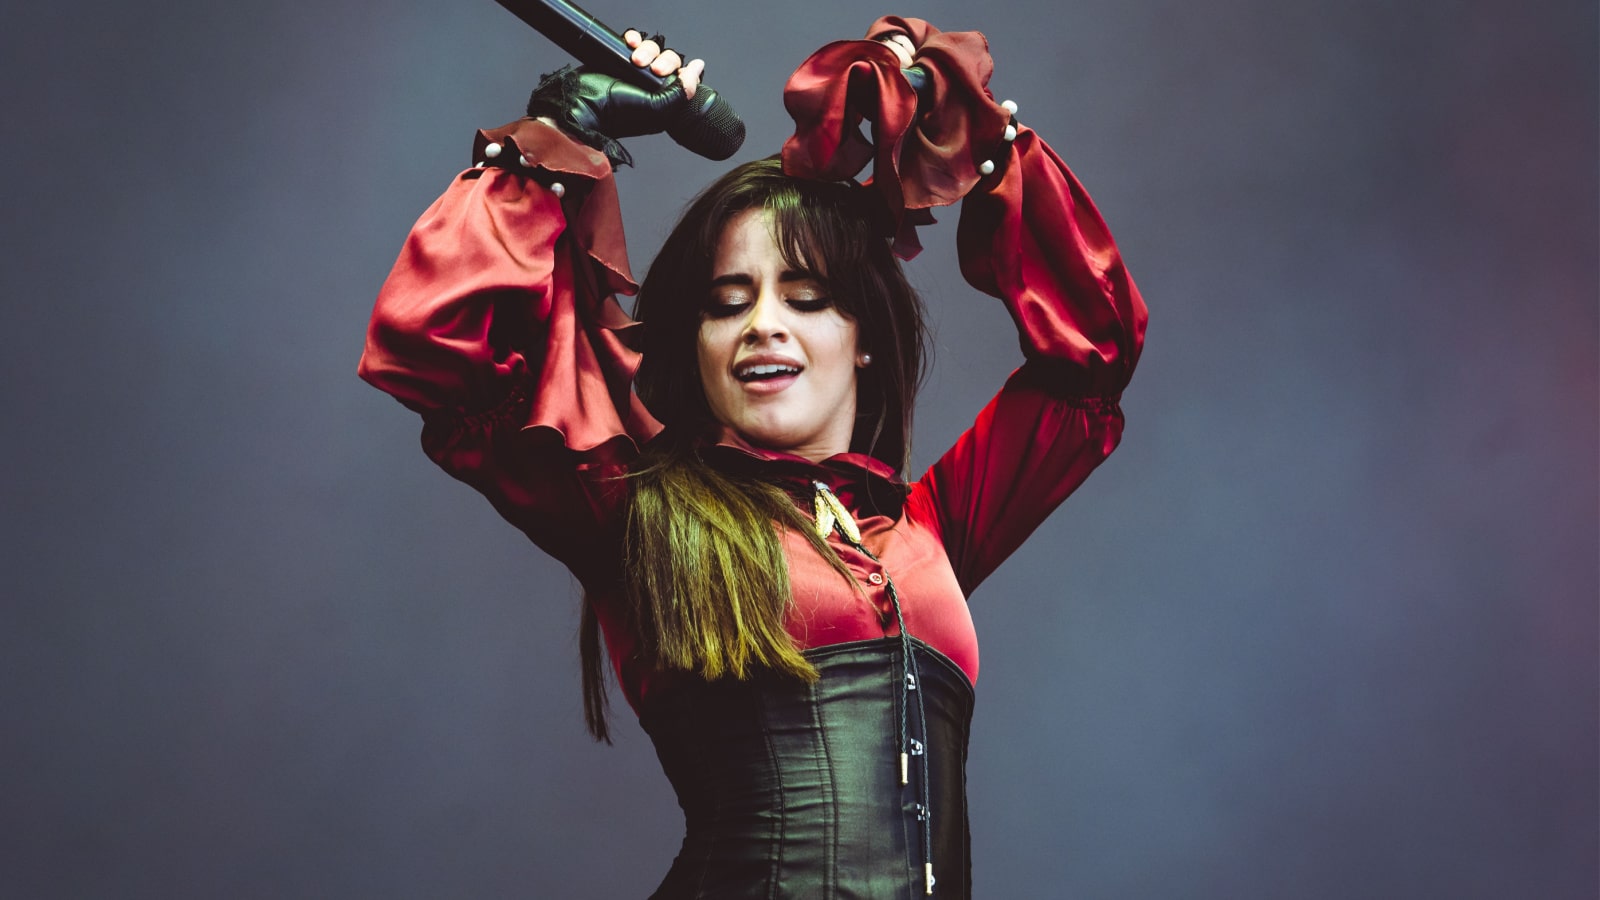 AUSTIN, TX / USA - OCTOBER 7th, 2018: Camila Cabello performs onstage at Zilker Park during Austin City Limits 2018 Weekend One.